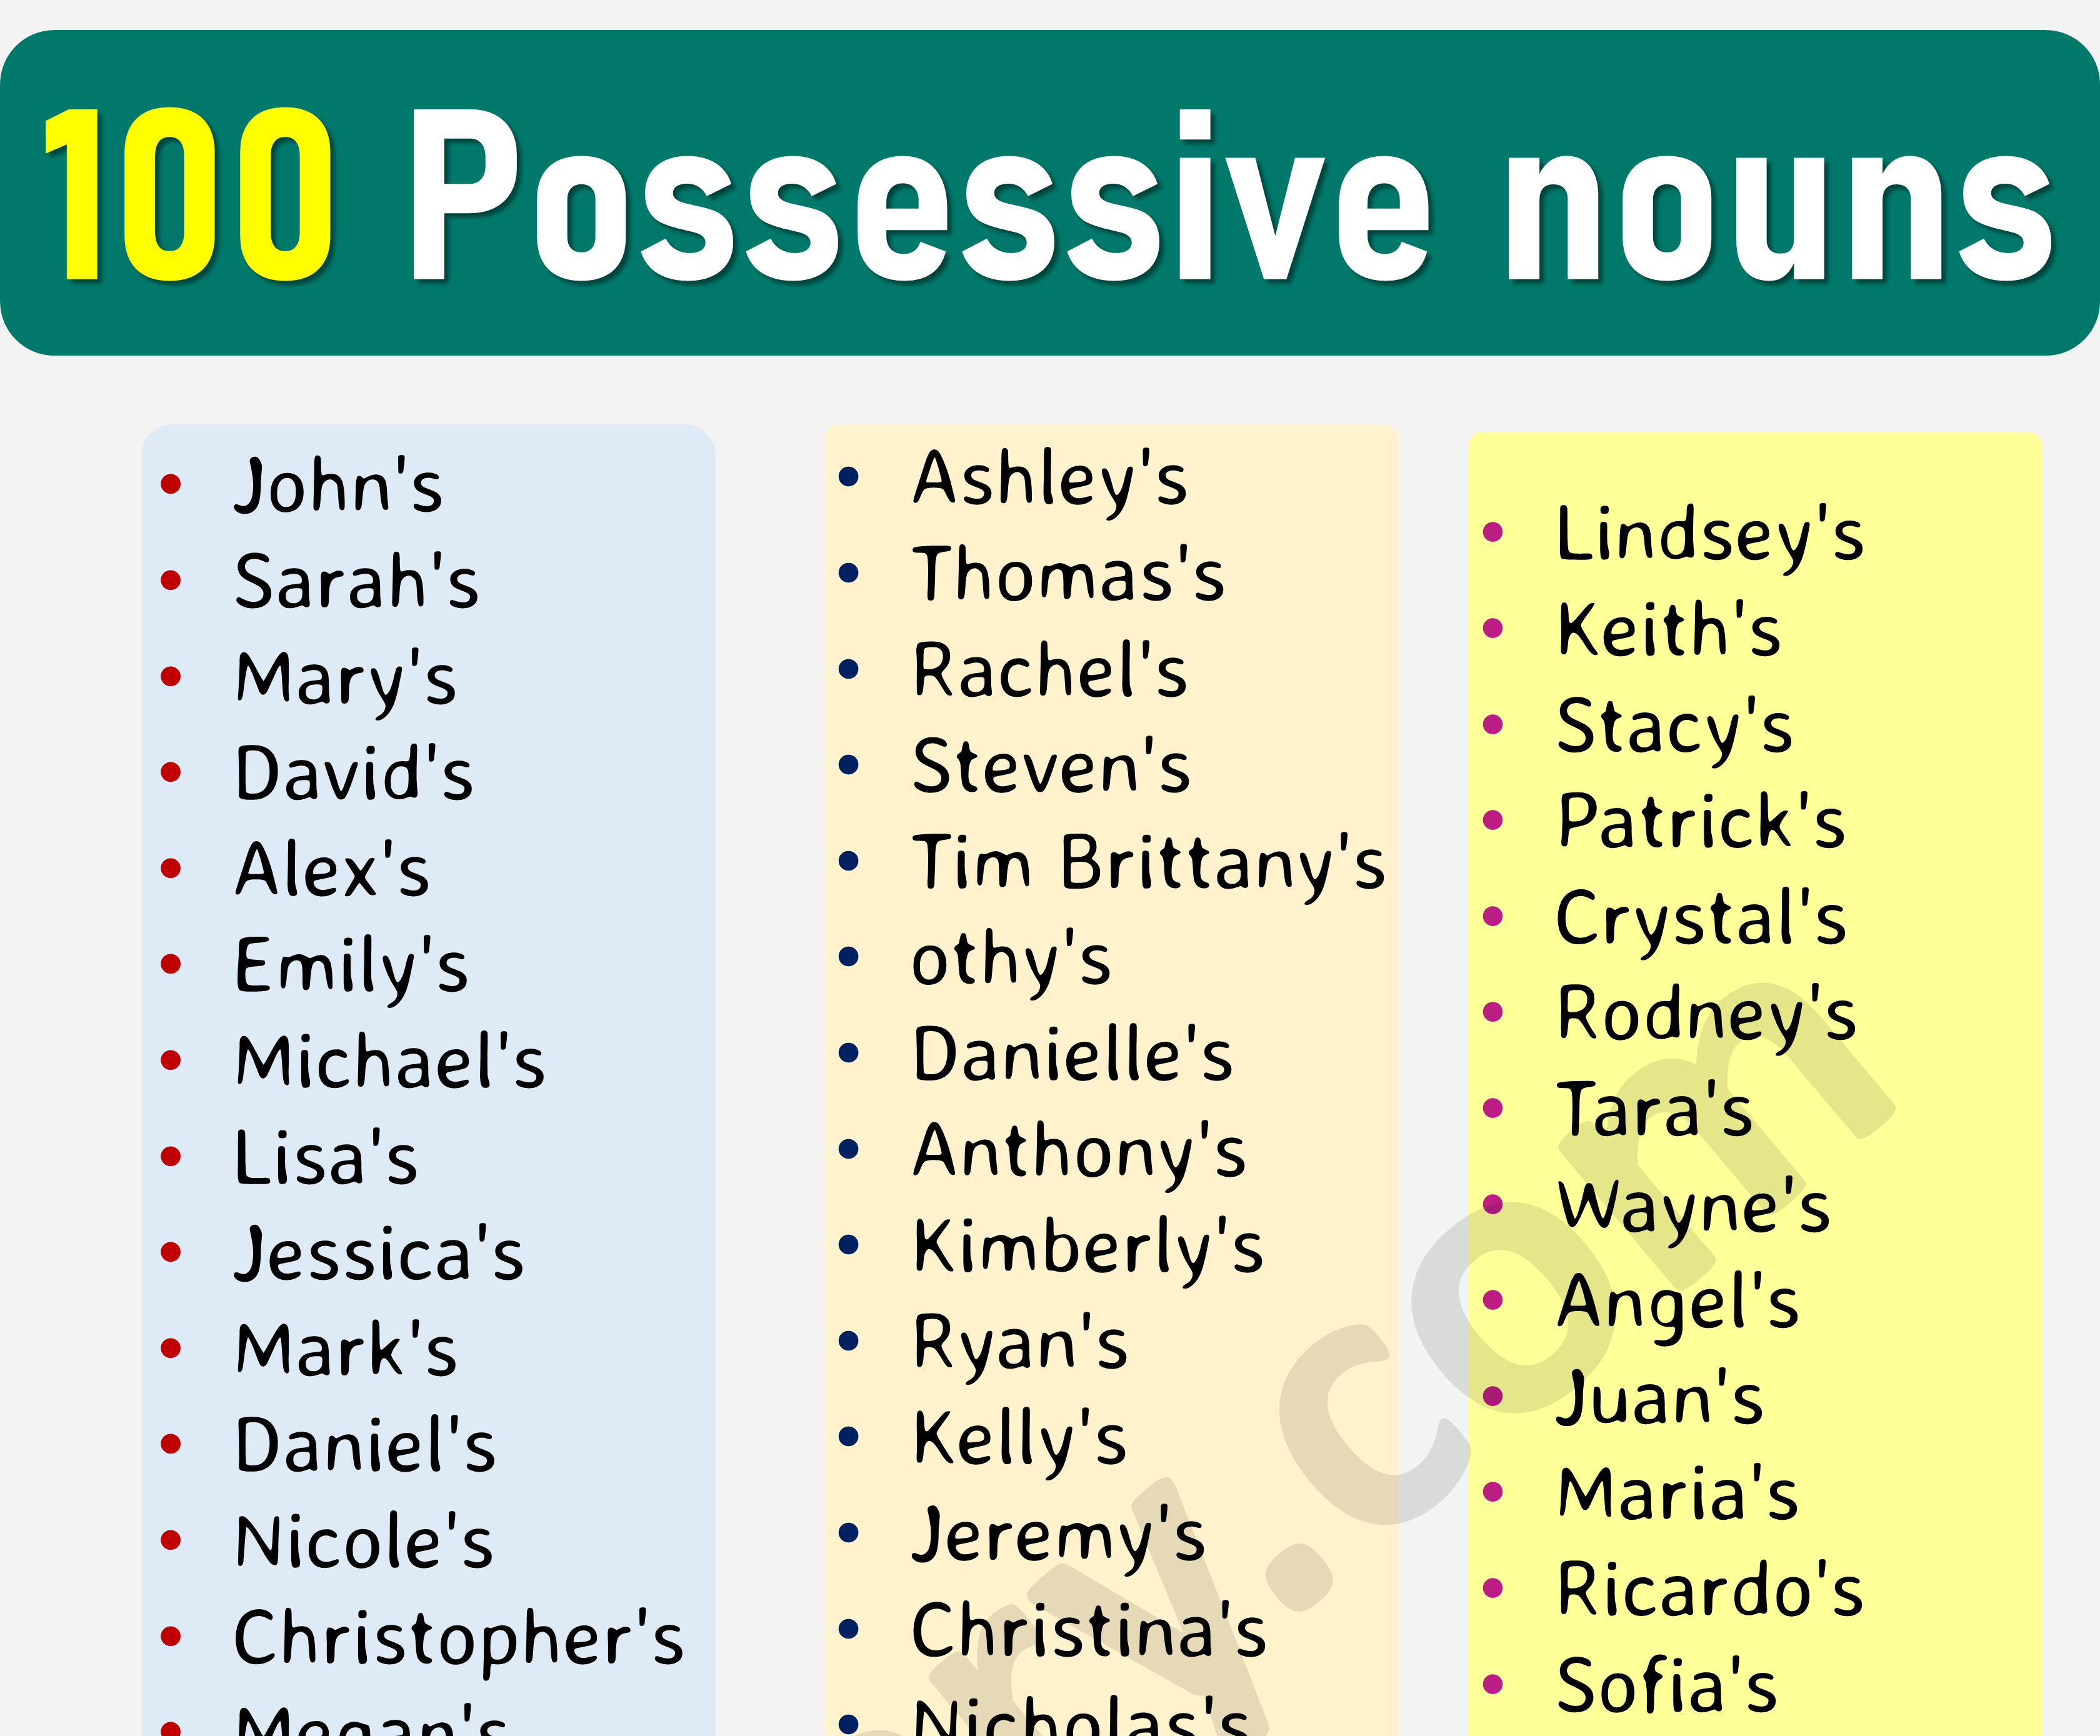 Possessive Nouns: A Beginner's Guide with 100 Examples